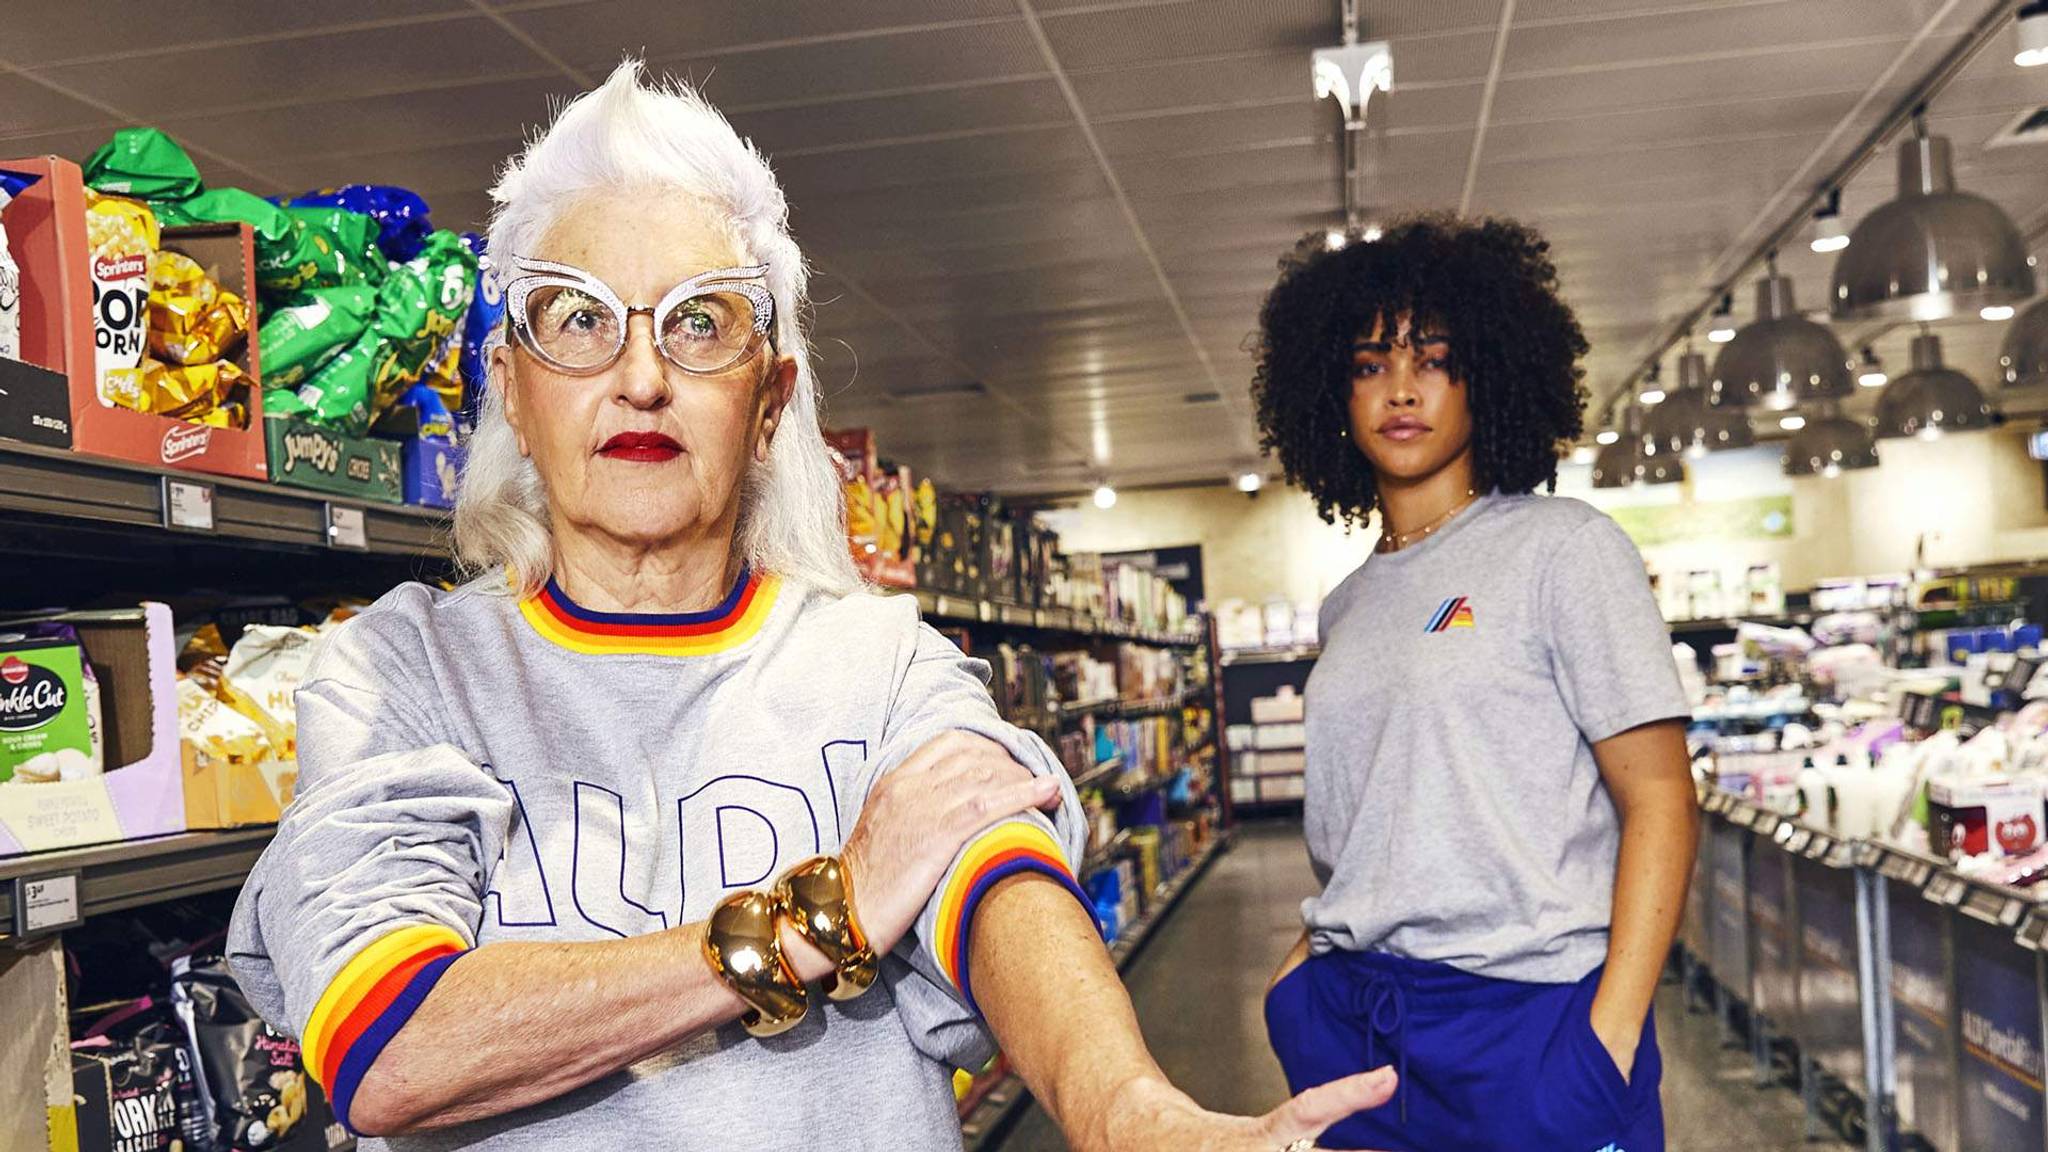 Aldi debuts streetwear for hypebeasts on a budget